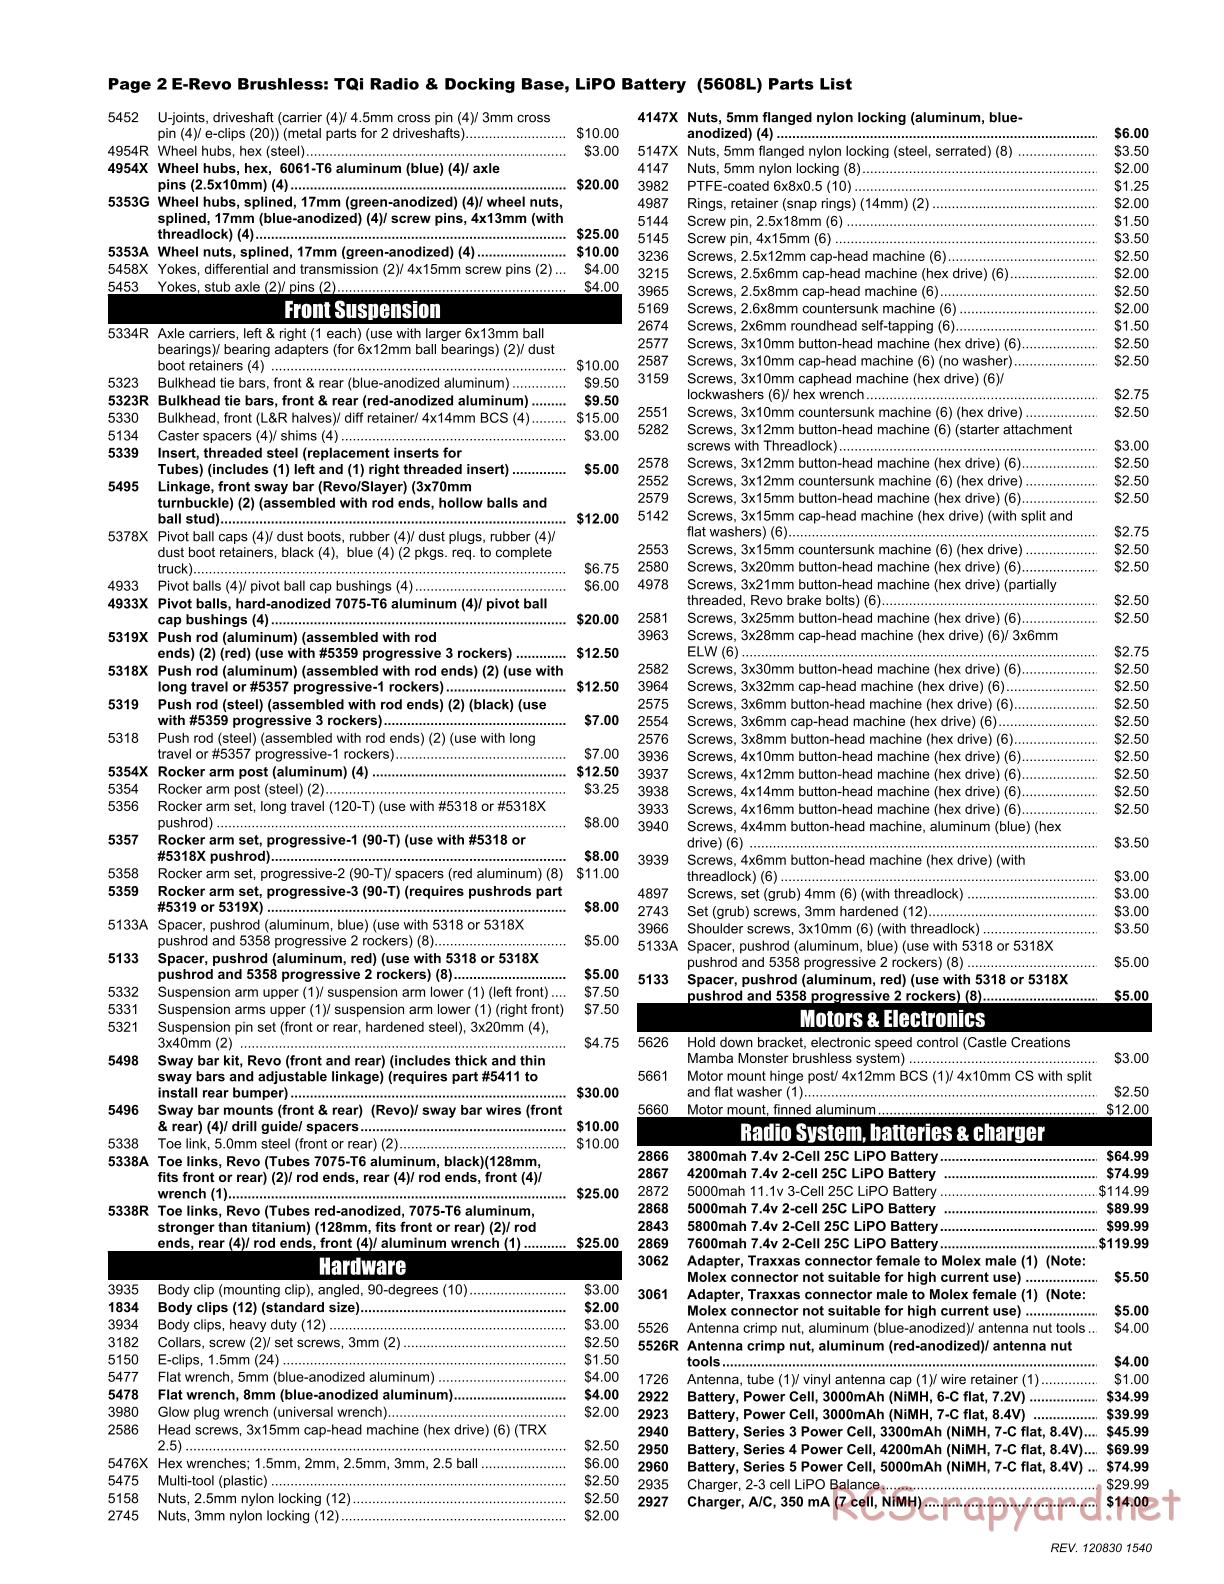 Traxxas - E-Revo Brushless (2012) - Parts List - Page 2